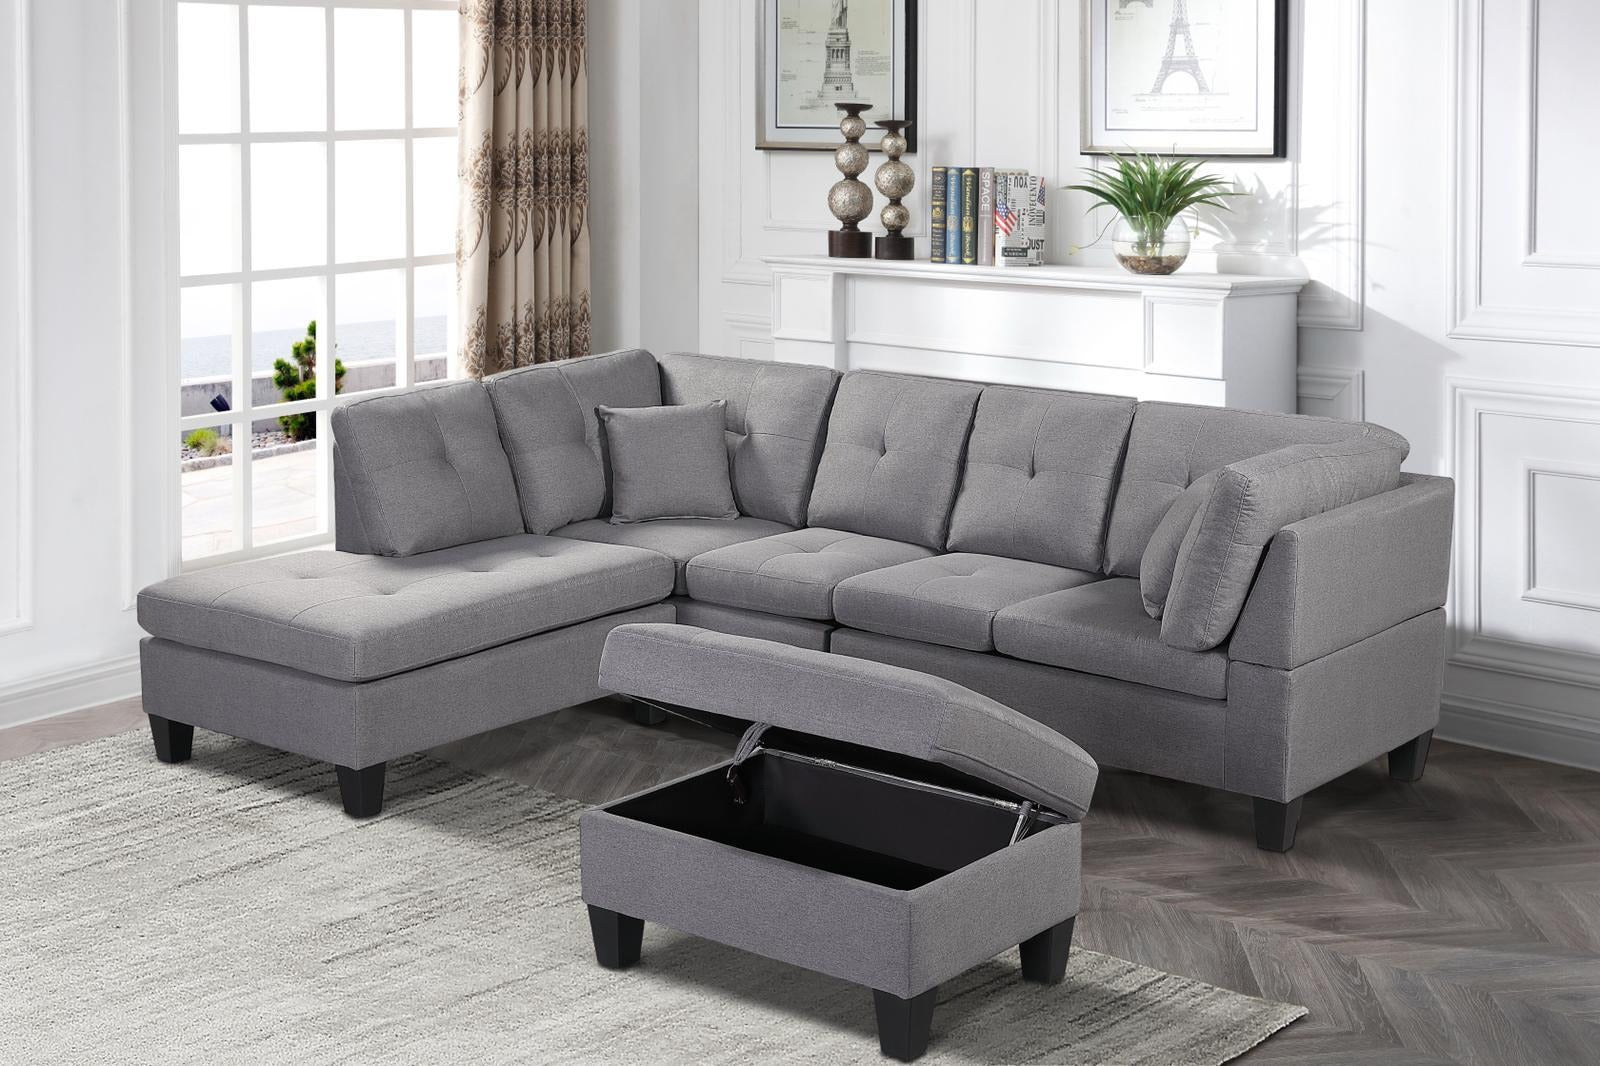 Reversible Sectional Sofa with Ottoman in Grey 1012